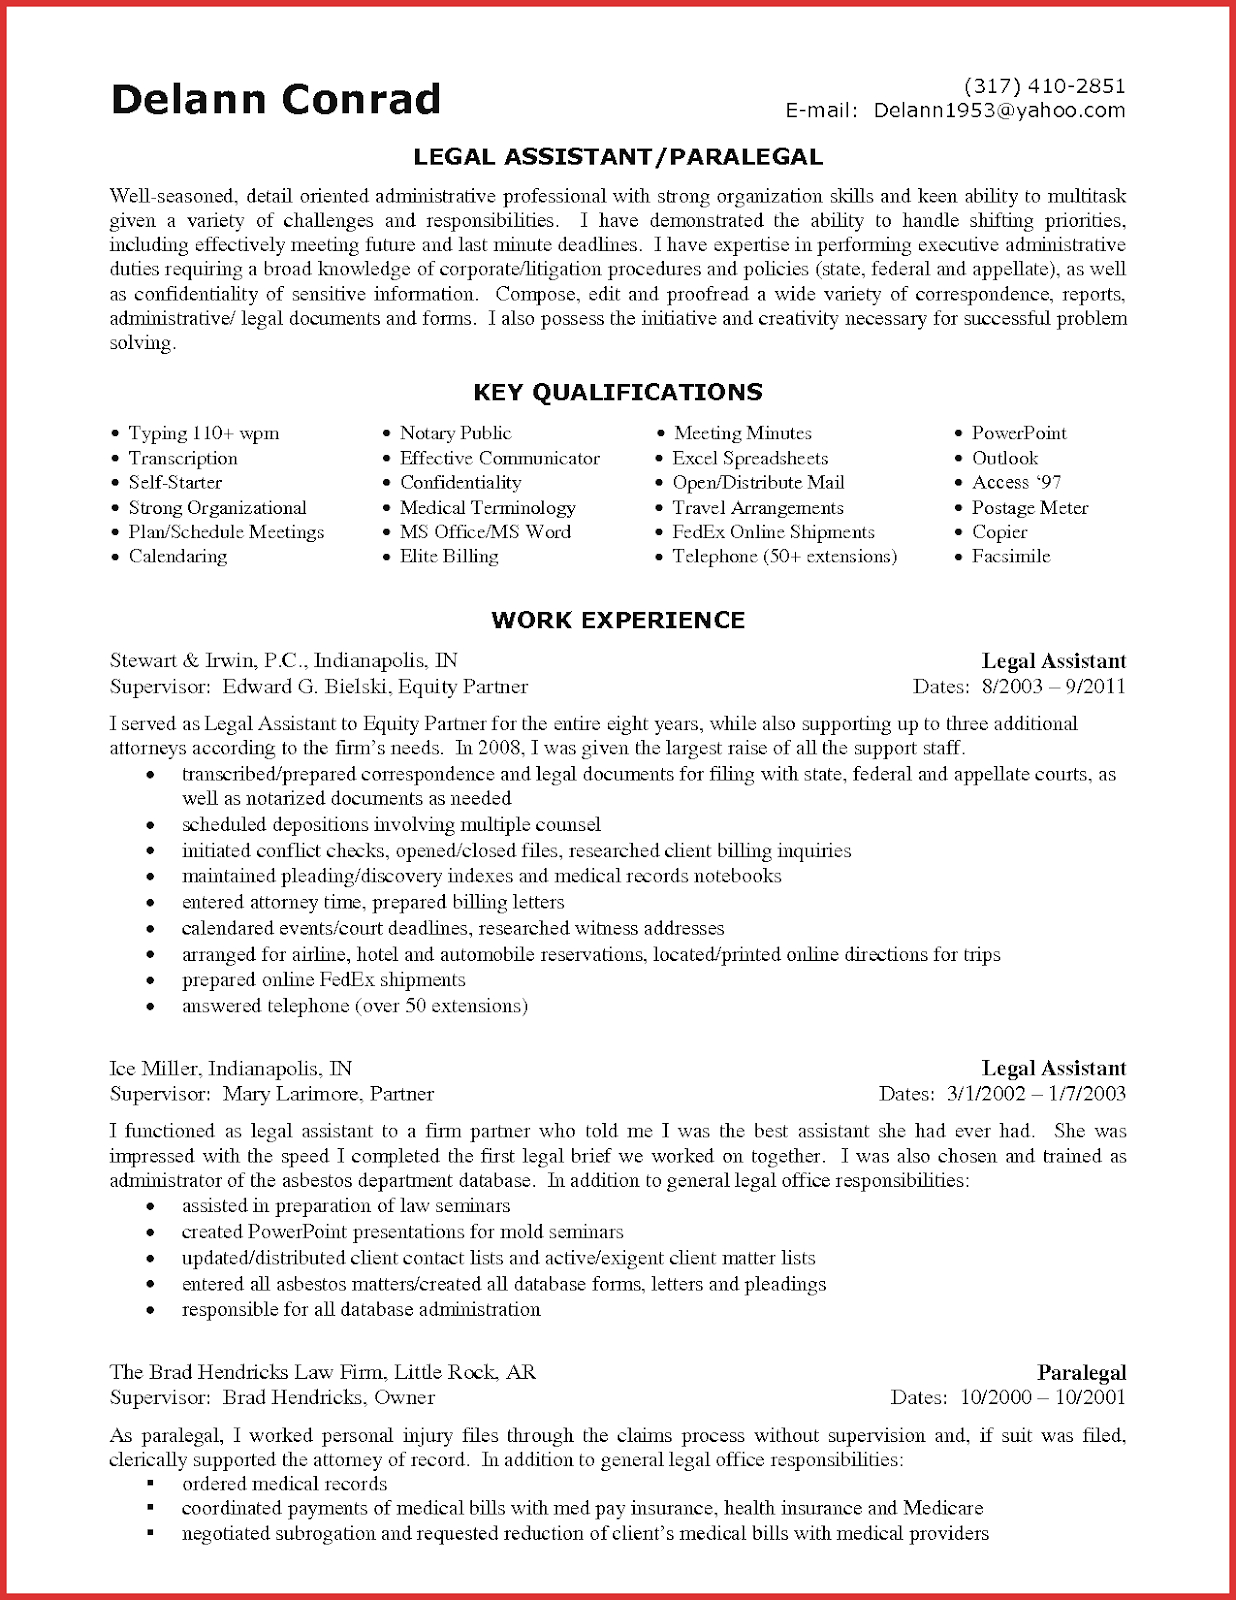 Paralegal Resume Sample 2019 Paralegal Resume Examples 2020 within measurements 1236 X 1600